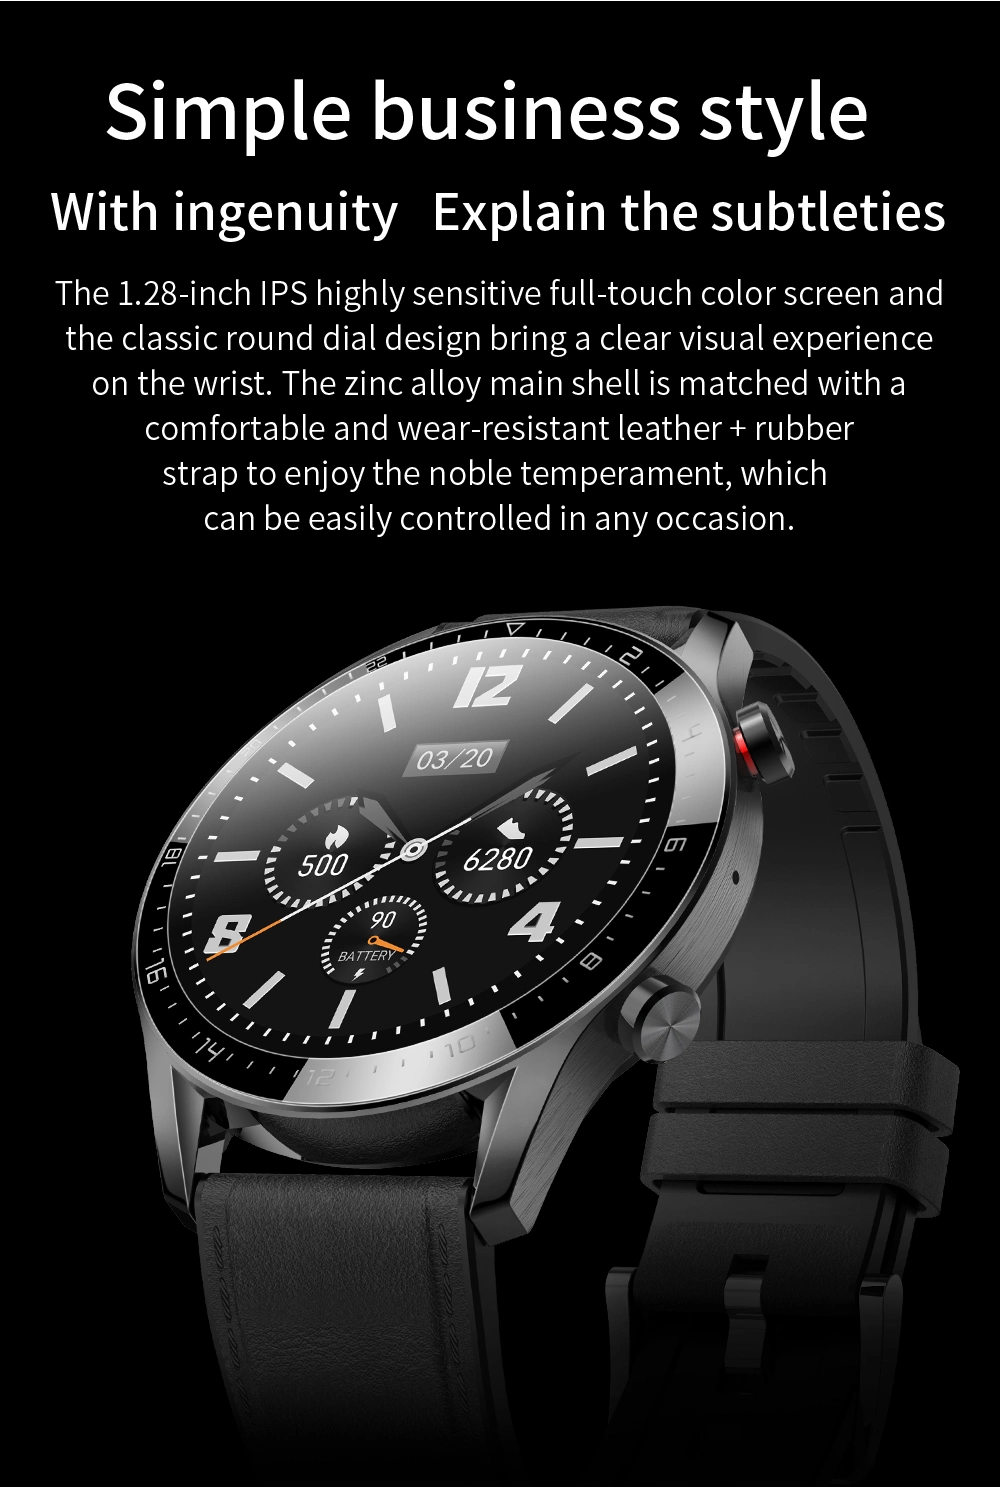 Cheap IP68 Waterproof Android Smartwatch Gt05 ECG Bluetooth Calling Smart Bracelet Watch for Huawei Mobile Phone